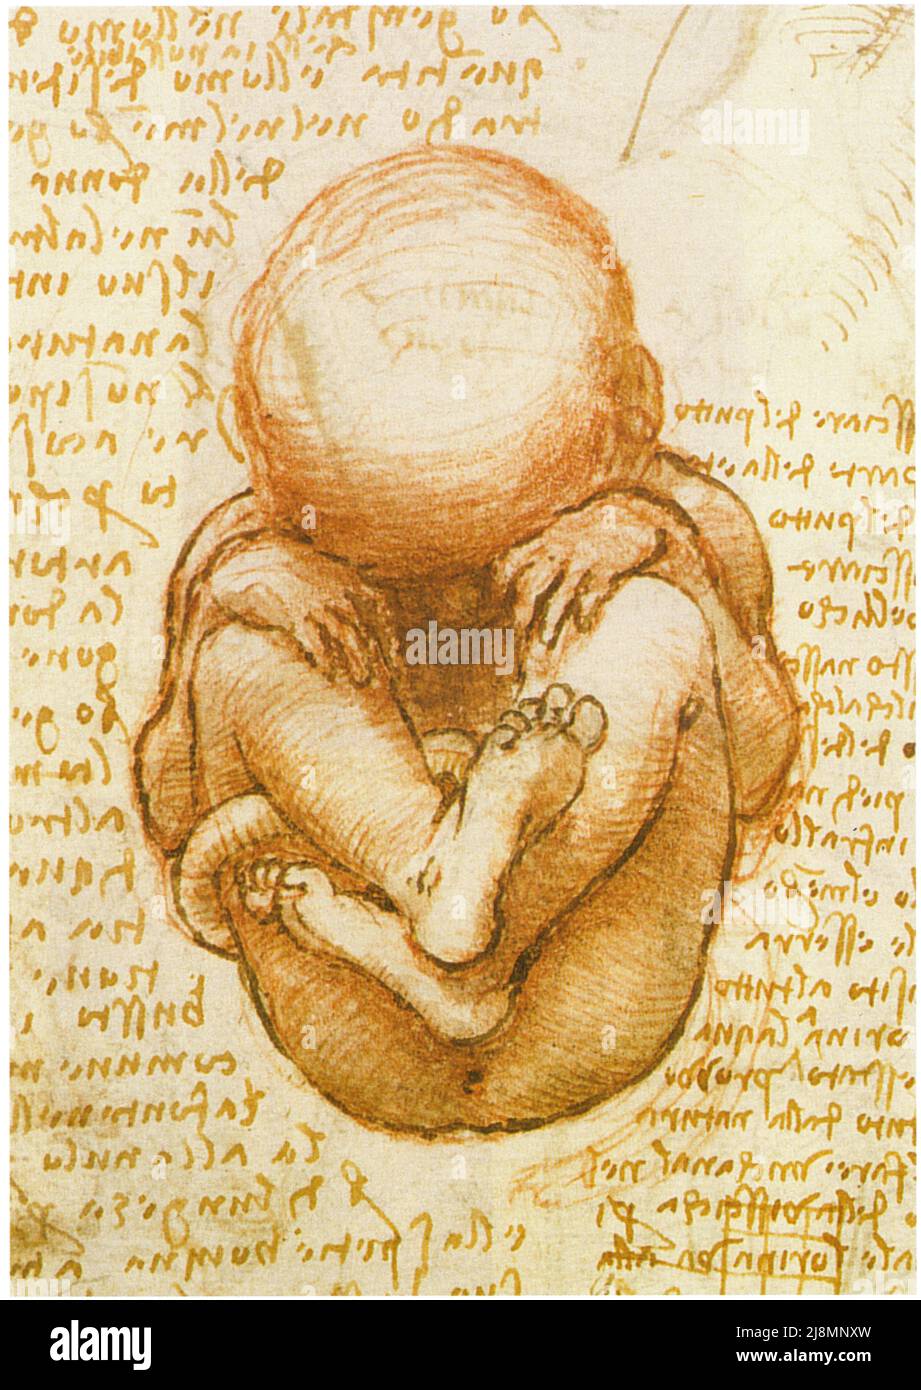 LEONARDO DA VINCI.THE MYSTERY OF CREATION.DETAIL FROM A SHEET OF STUDIES OF THE FOETUS IN THE WOMB. Stock Photo